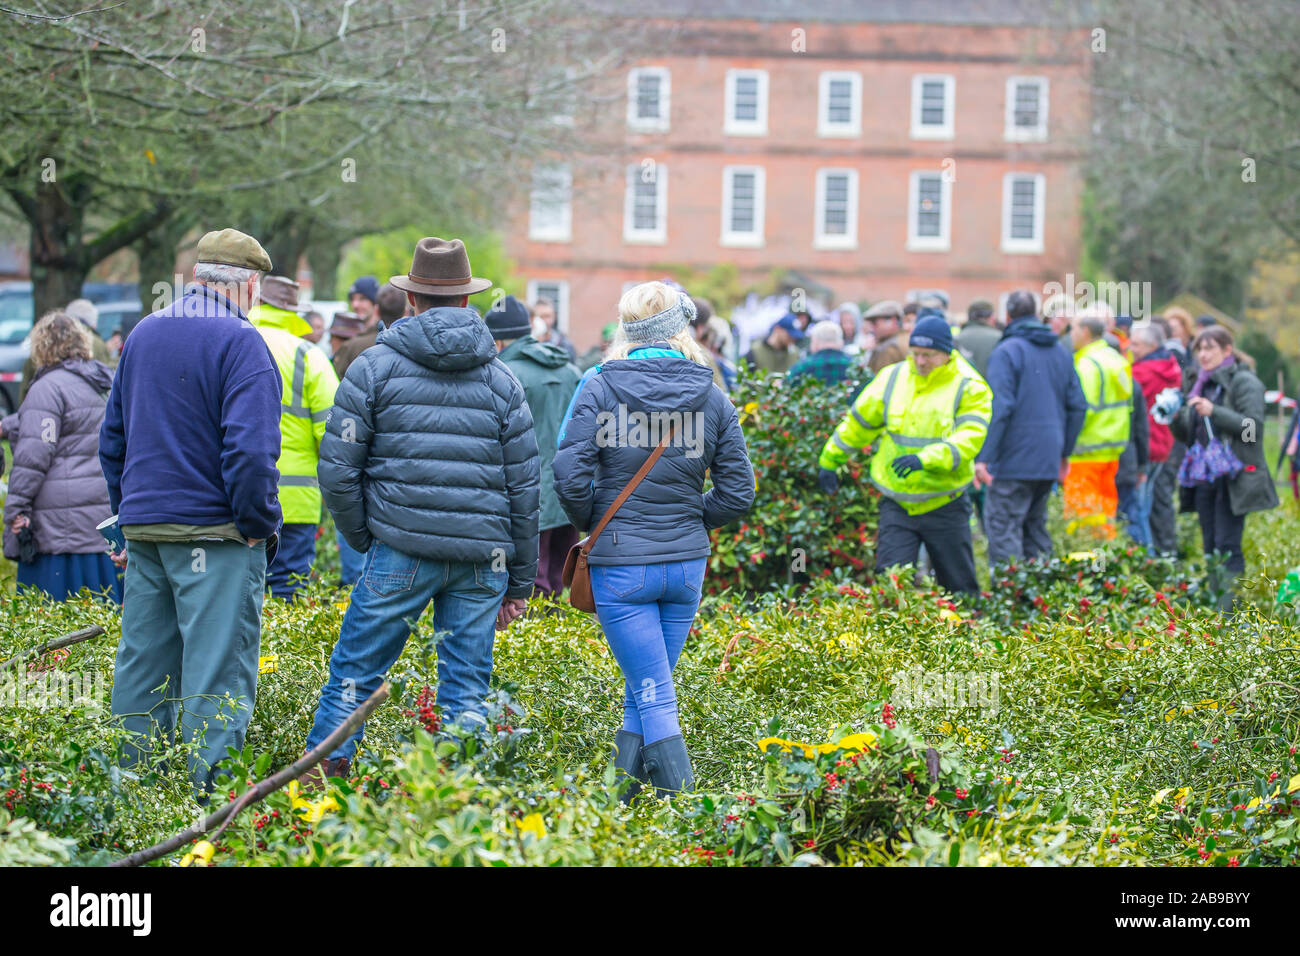 Tenbury Wells, UK. 26th Nov, 2019. In spite of wet and dreary weather, nothing dampens the spirit of these UK buyers as they flock to the Worcestershire town of Tenbury Wells for the annual Mistletoe and Holly Auction. With UK growers offering such a staggering selection of freshly-cut, berry-laden lots for this event, retailers travel from far and wide to secure the finest festive foliage for their business' countdown to Christmas. Traders wait patiently outdoors in front of host property, Burford House, for auctioneer, Nick Champion, to start the bidding. Credit: Lee Hudson/Alamy Live News Stock Photo